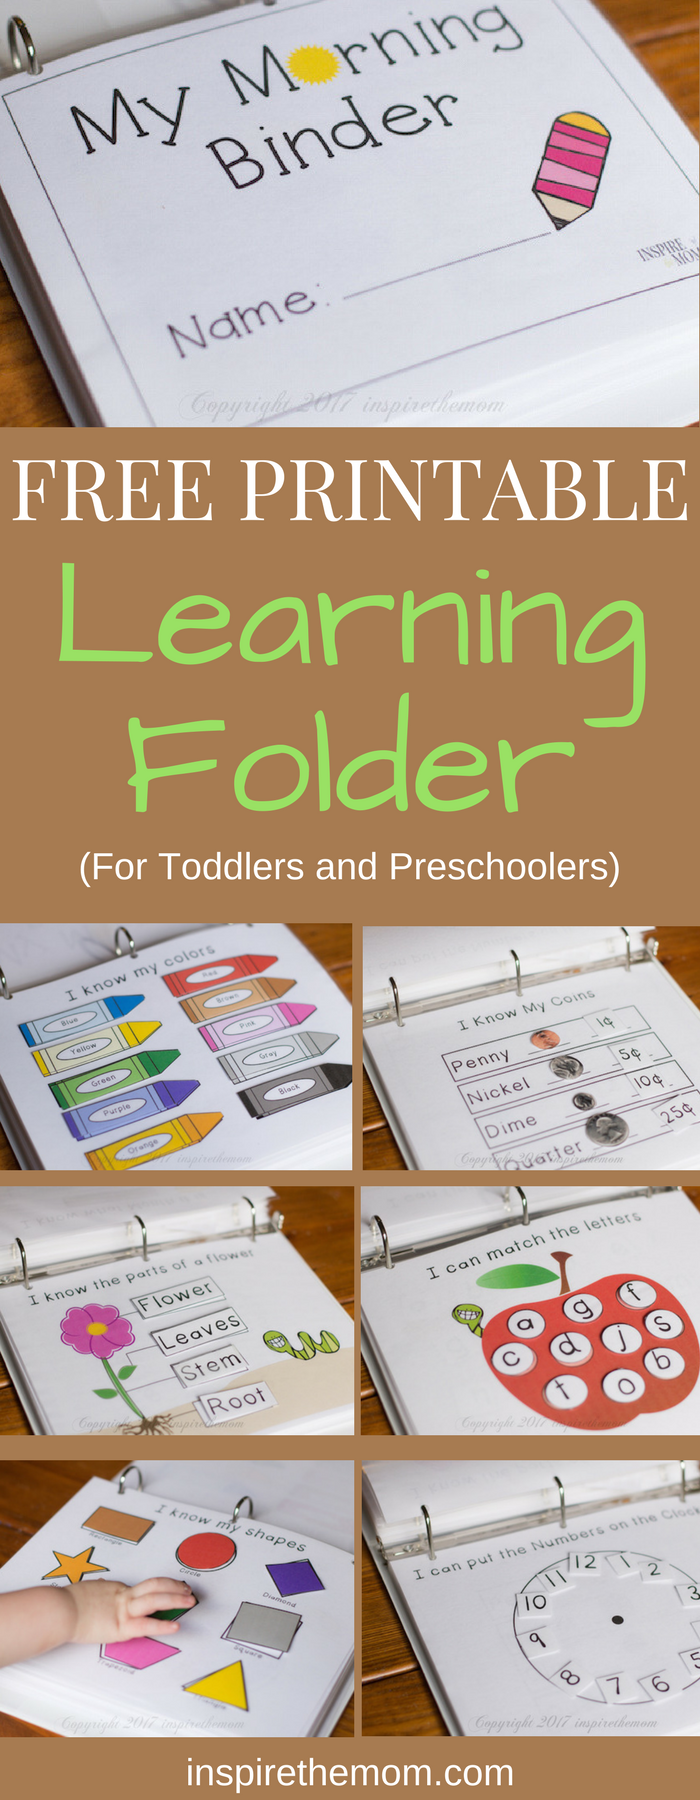 Whether you are teaching your prechooler at home or working with them in preparation for school, here is a free printable learning